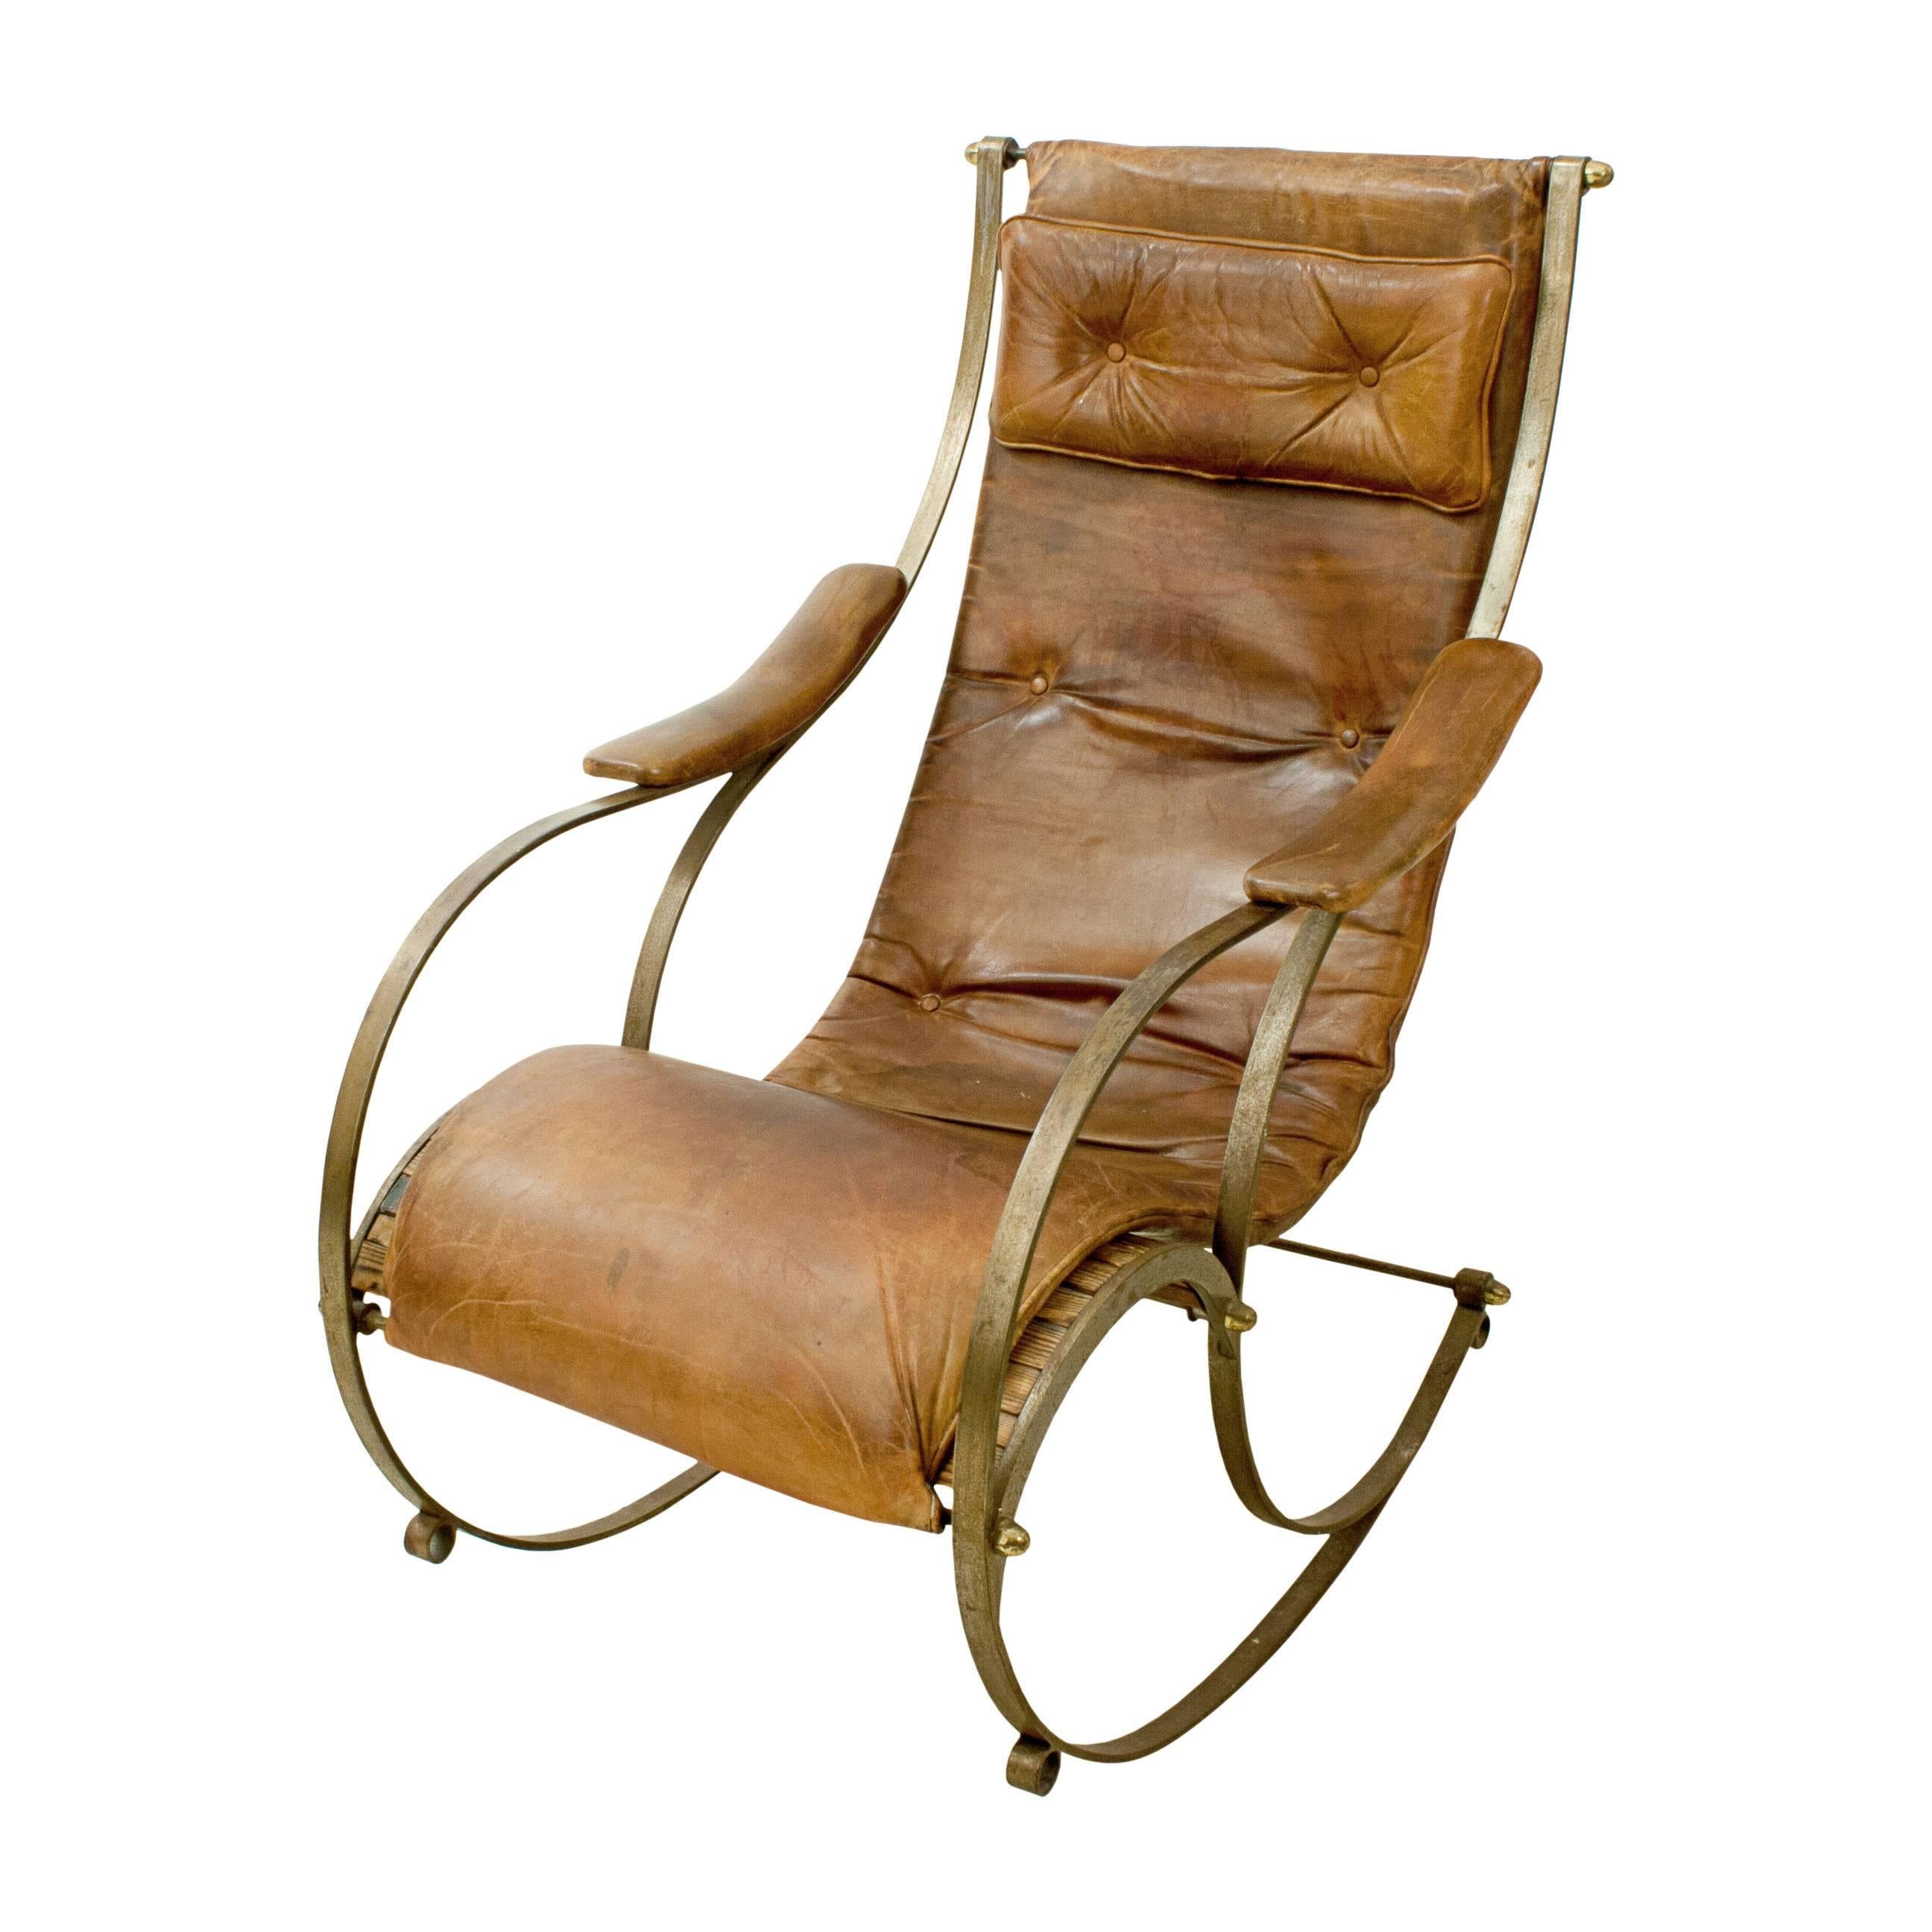 Rocking Chair, R. W. Winfield.
A late 19th century steel framed rocking chair after R. W. Winfield. The chair has a steel frame with brass fittings, padded leather armrests and a fixed upholstered padded tan leather button back cushion of a slung